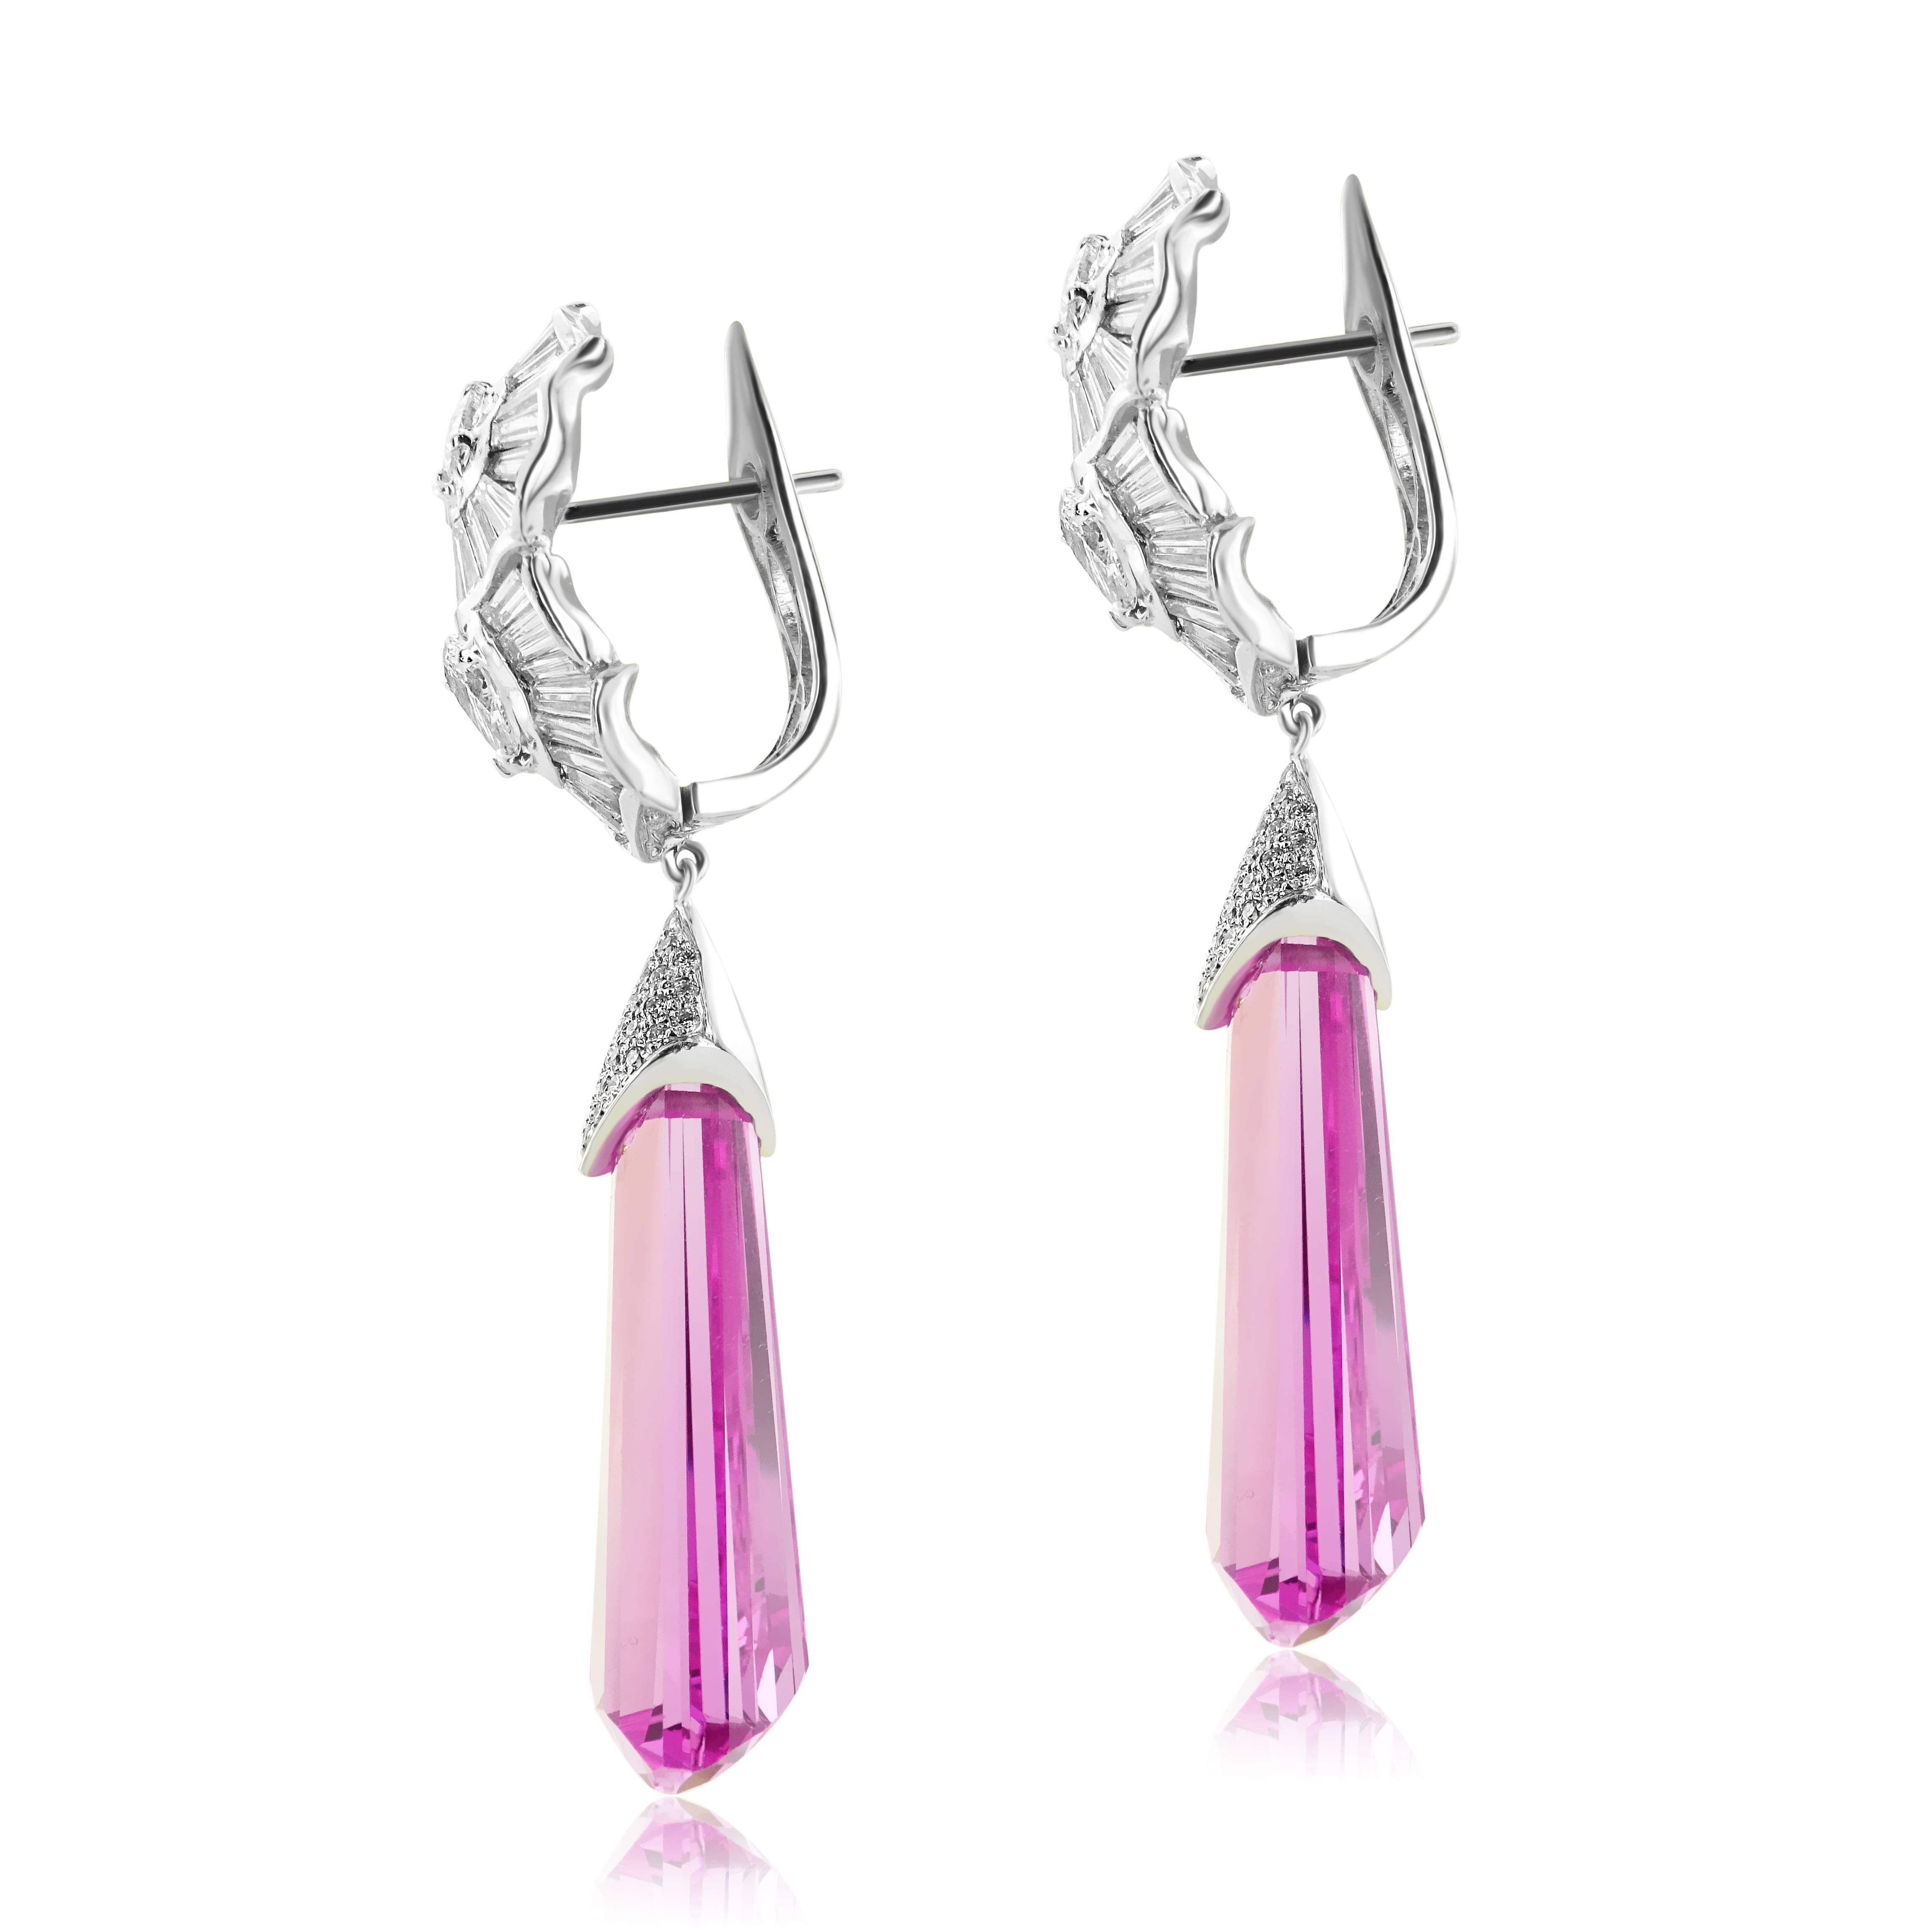 WHITE GOLD PINK TOPAZ EARRINGS - 40.51 CT

Set in 18Kt White gold


Total pink topaz weight: 33.18 ct
[ 2 stones ]

Total tapered baguette diamond weight: 6.12 ct
Color: D
Clarity: VVS

Total pear cut diamond weight: 0.92 ct
Color: F
Clarity: